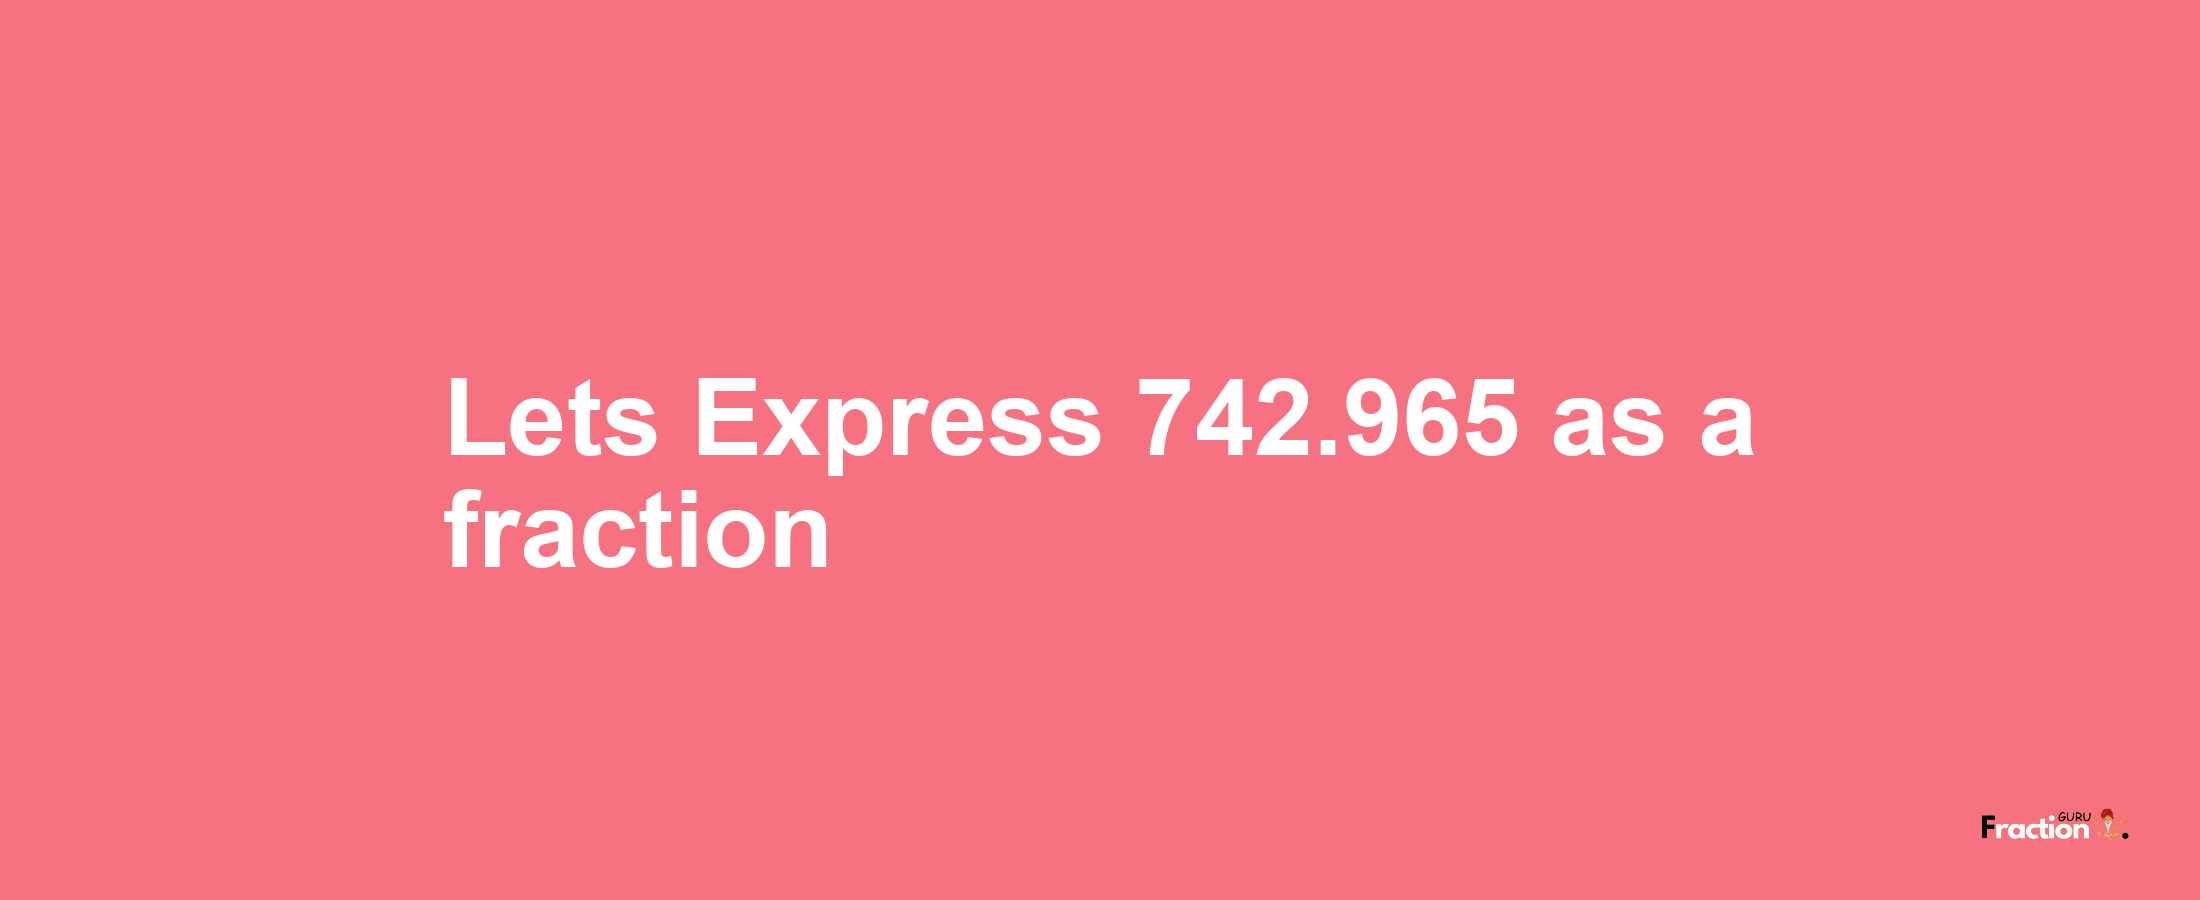 Lets Express 742.965 as afraction